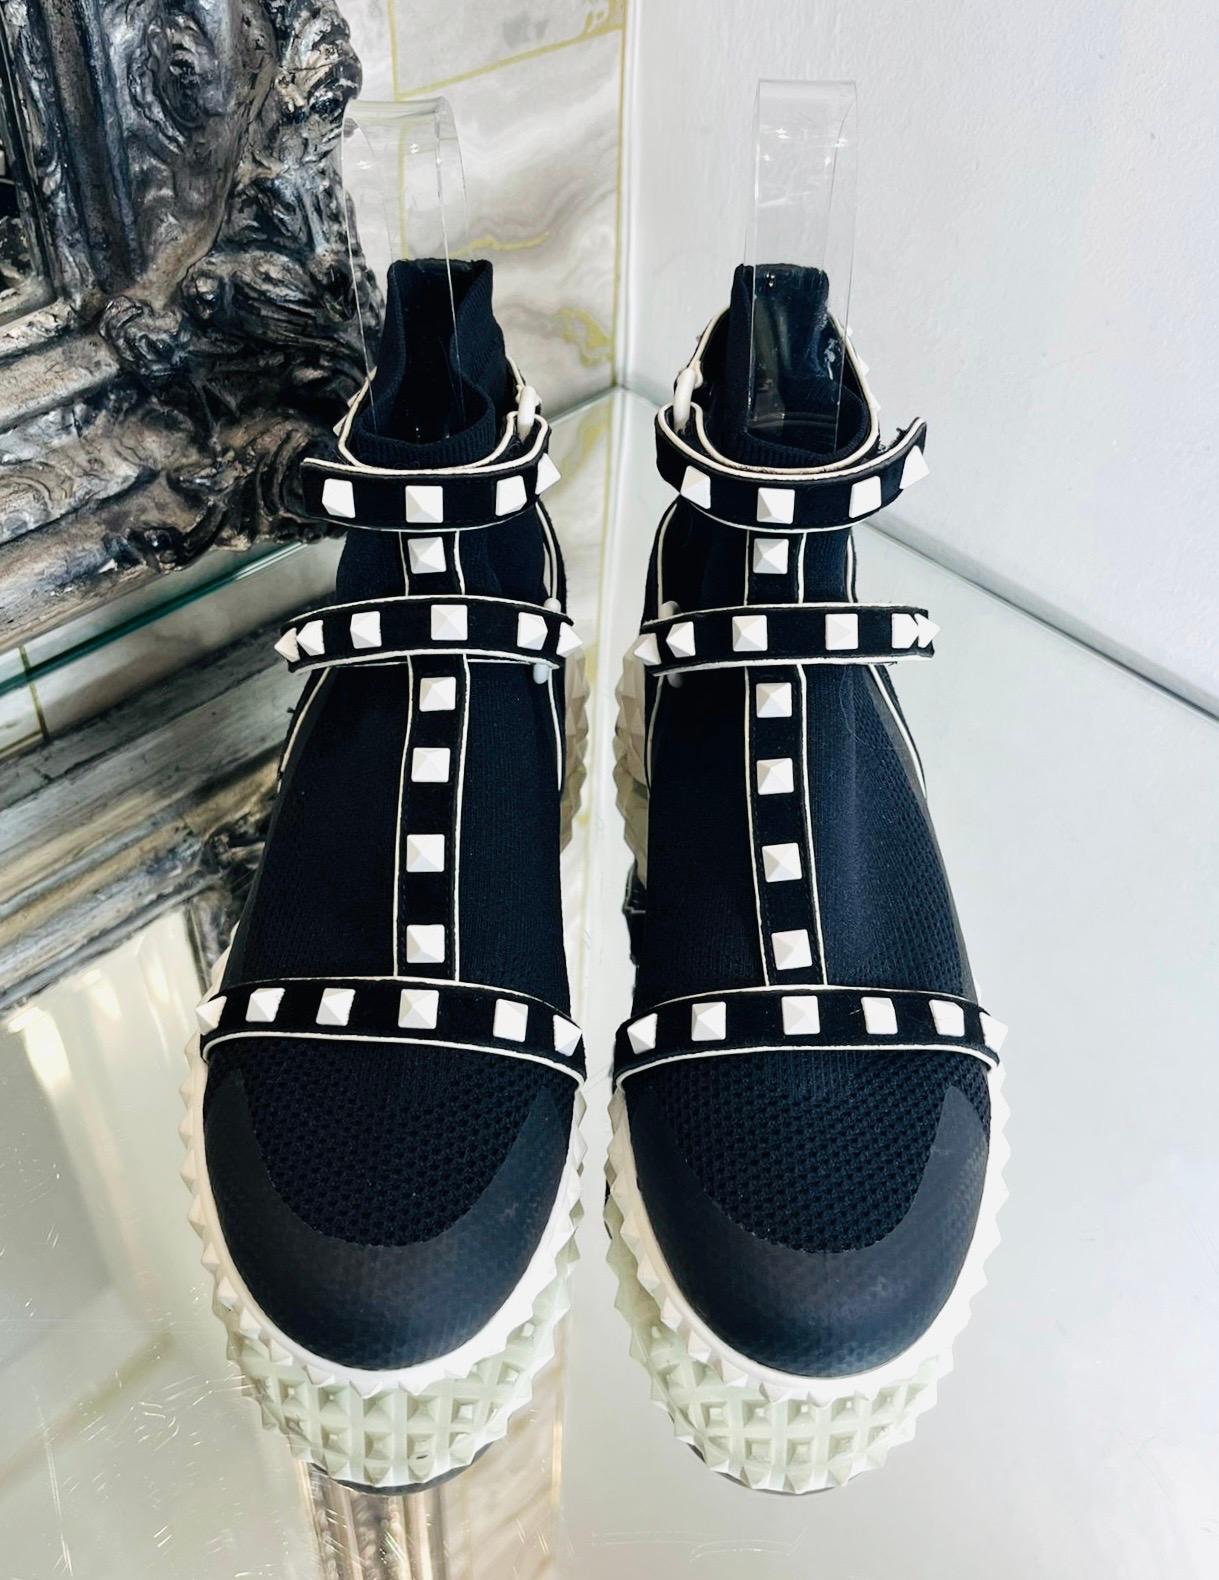 Valentino Rockstud Sock Sneakers

Black high-top sneakers designed with signature white pyramid stud detailing and bonded trim throughout.

Featuring Velcro ankle strap at rib knit collar, round toe and white, studded rubber soles.

Size –